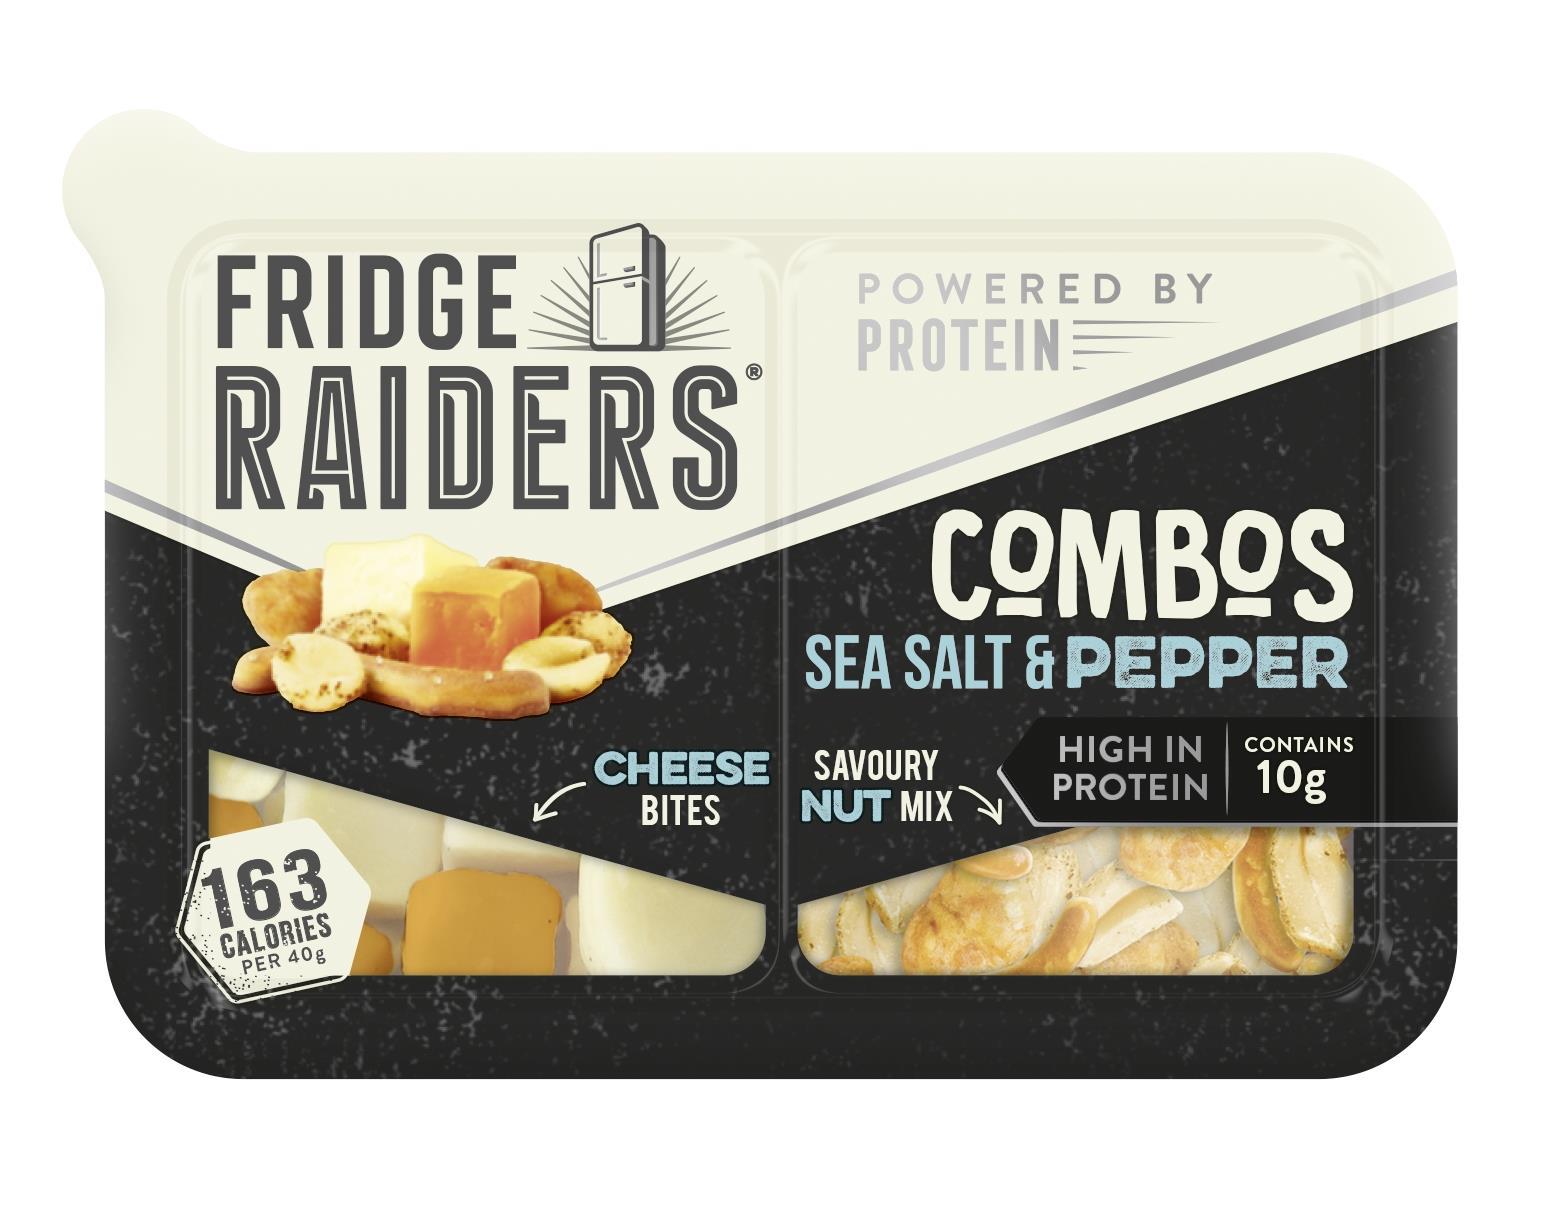 Can You Put Potatoes In The Fridge Raider Fridge Raiders Reveals New Combo Snacks Product News Convenience Store